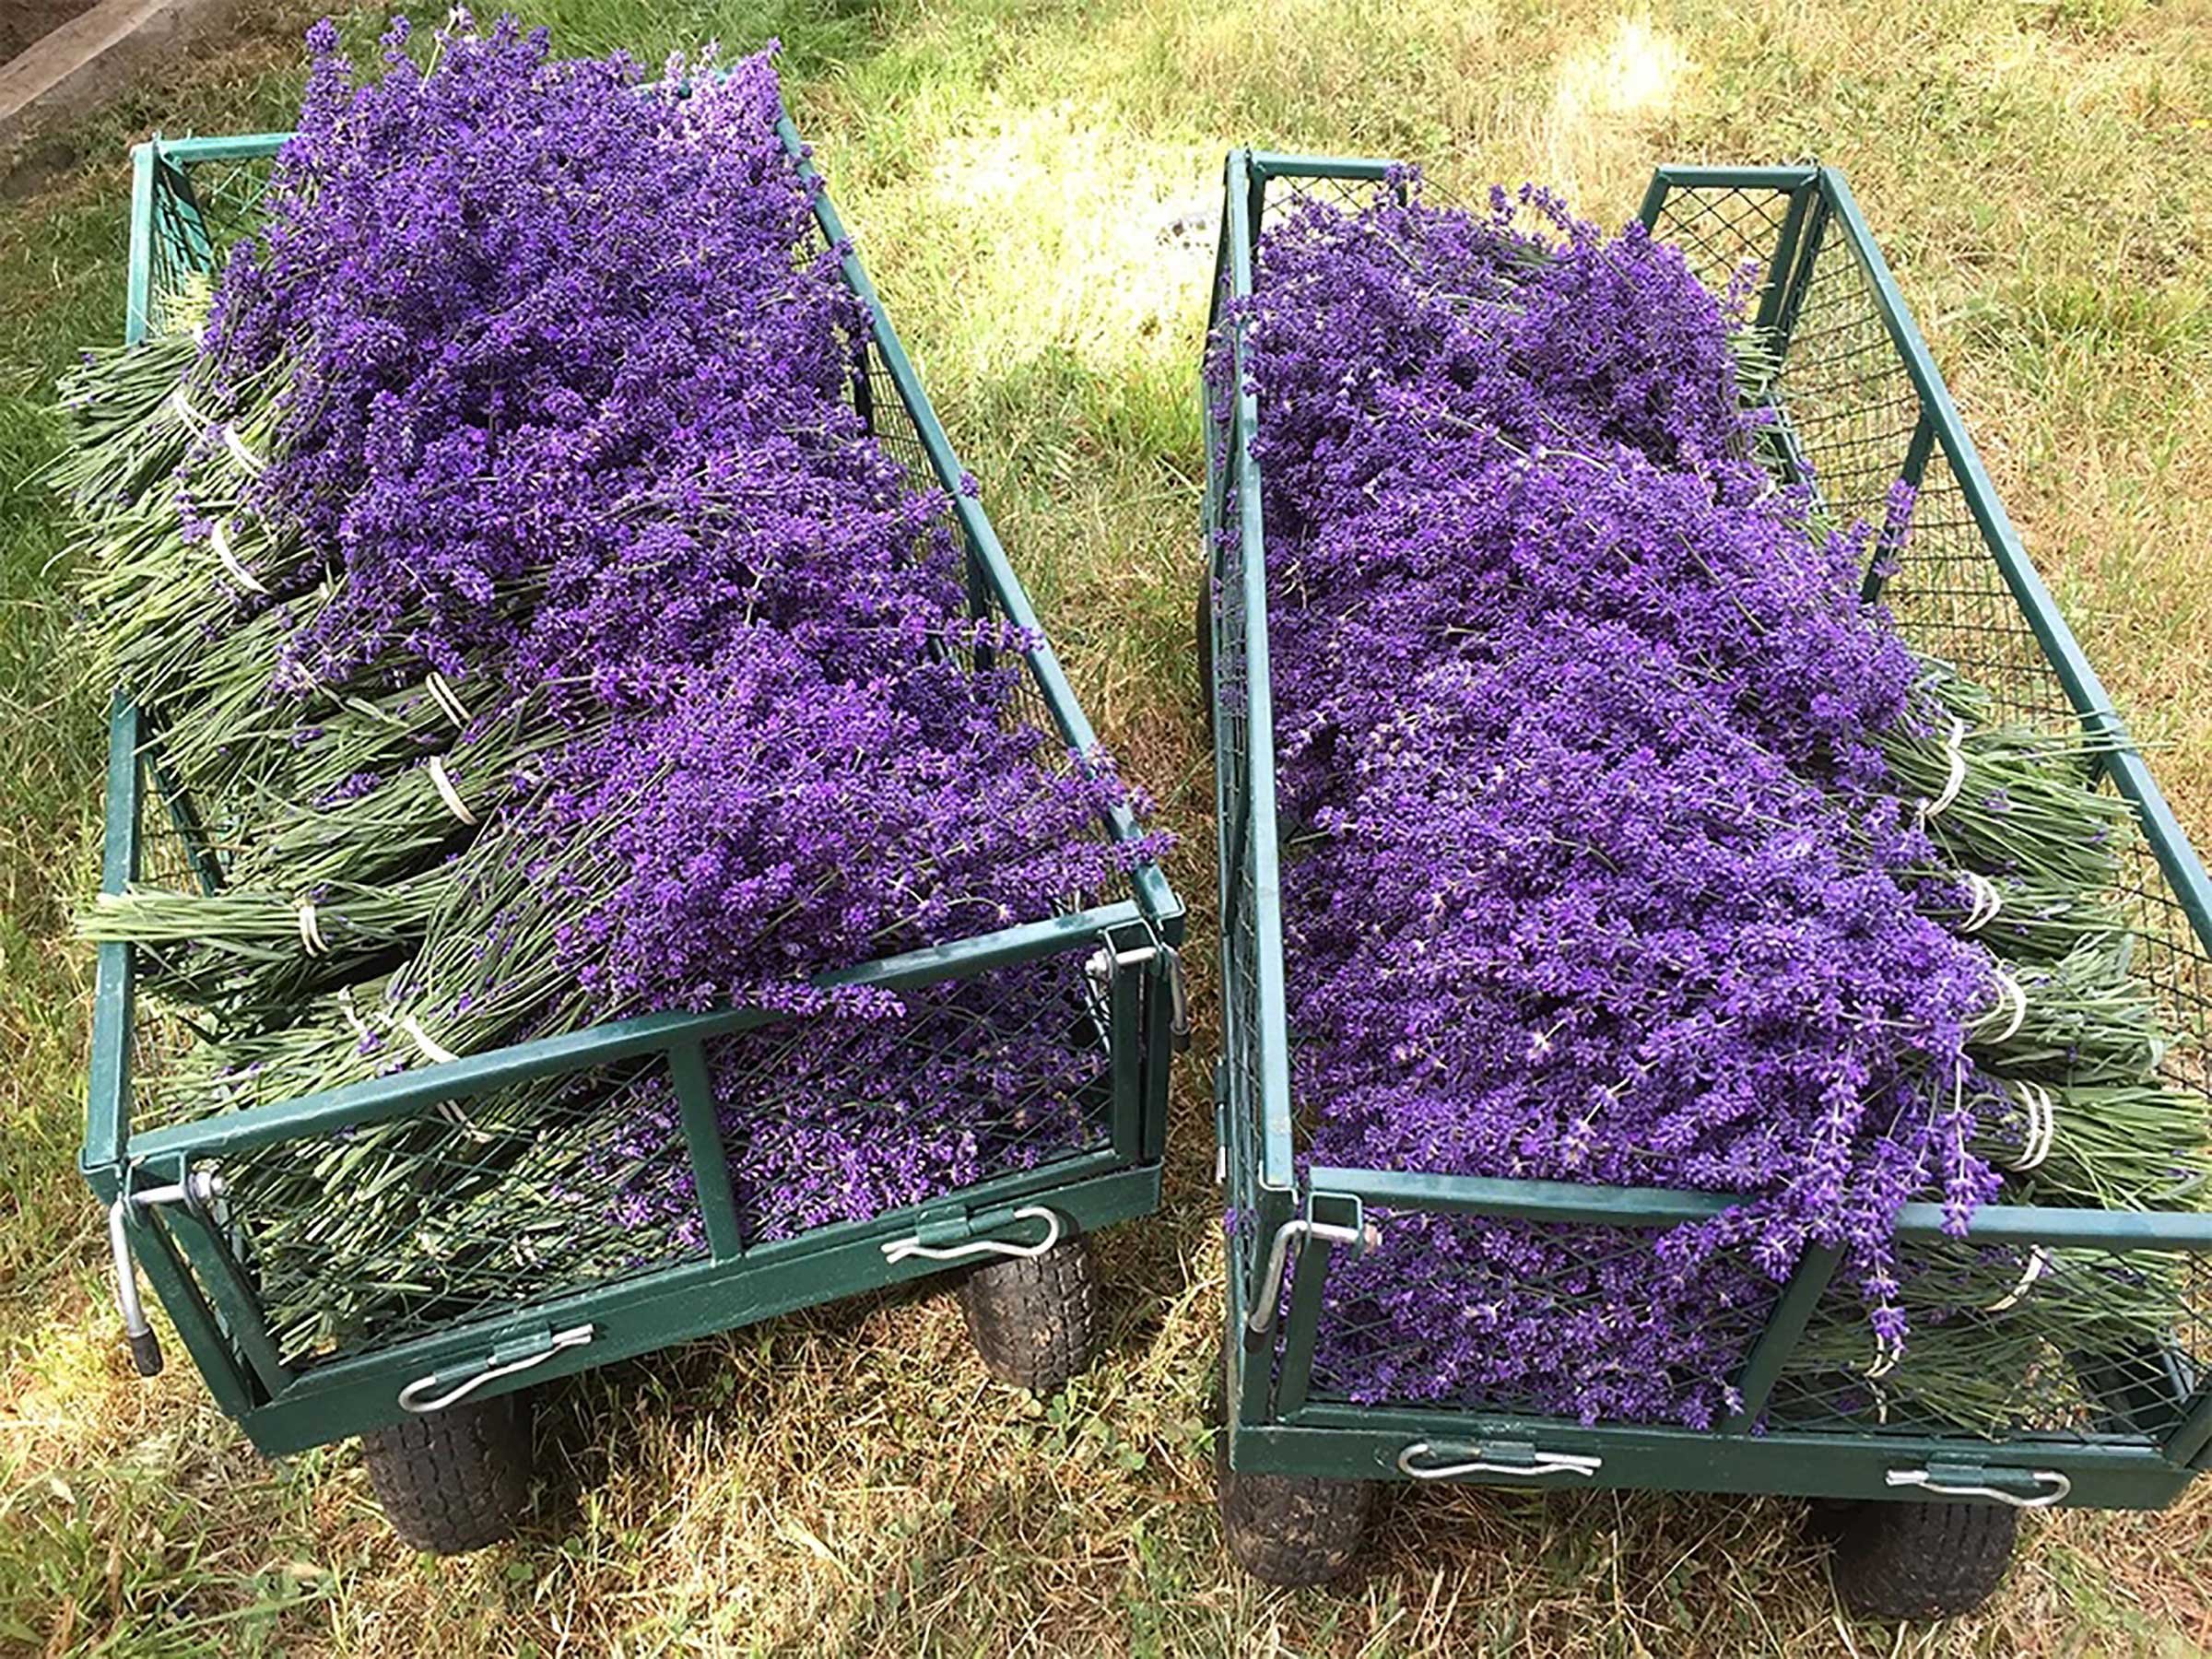 Lavender wagons carry bundles from the field to the barn